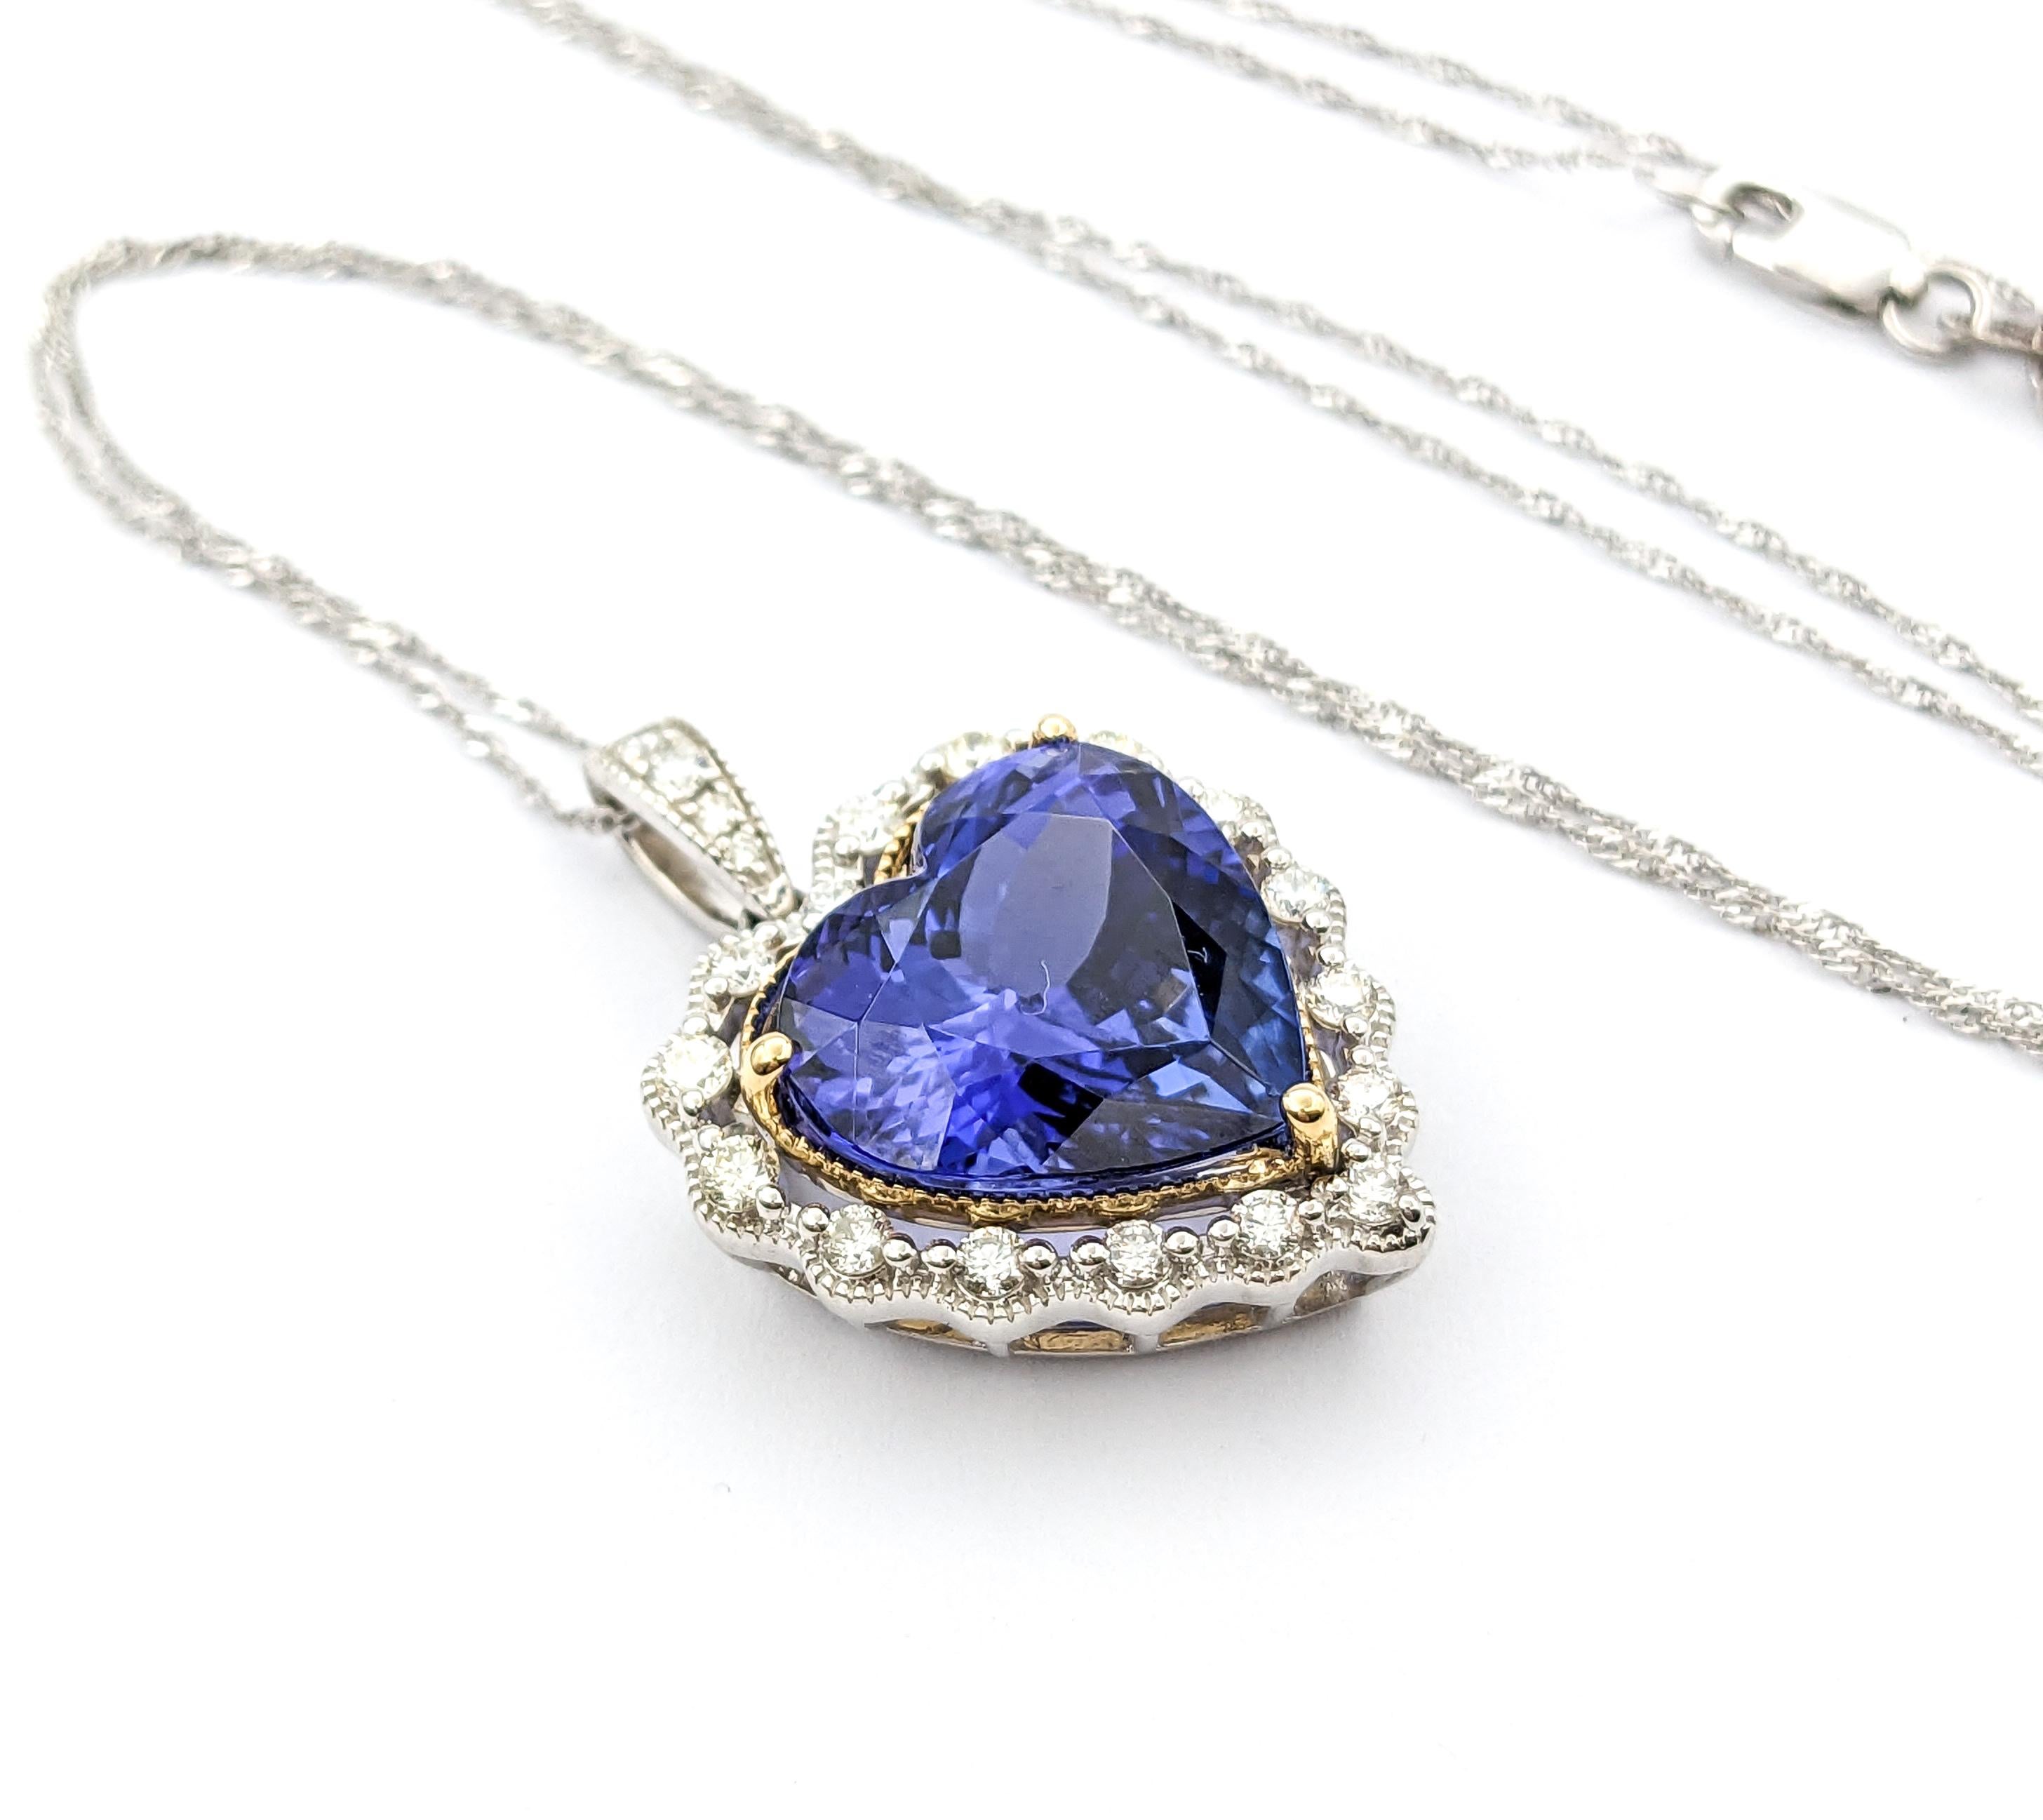 10.6ct Tanzanite Pendant With Diamond Halo In Two Tone Gold

Introducing this exquisite Gemstone Fashion Pendant crafted in 14k white gold. This pendant features a stunning 10.6ct Tanzanite centerpiece, complemented by .60ctw of diamonds. These